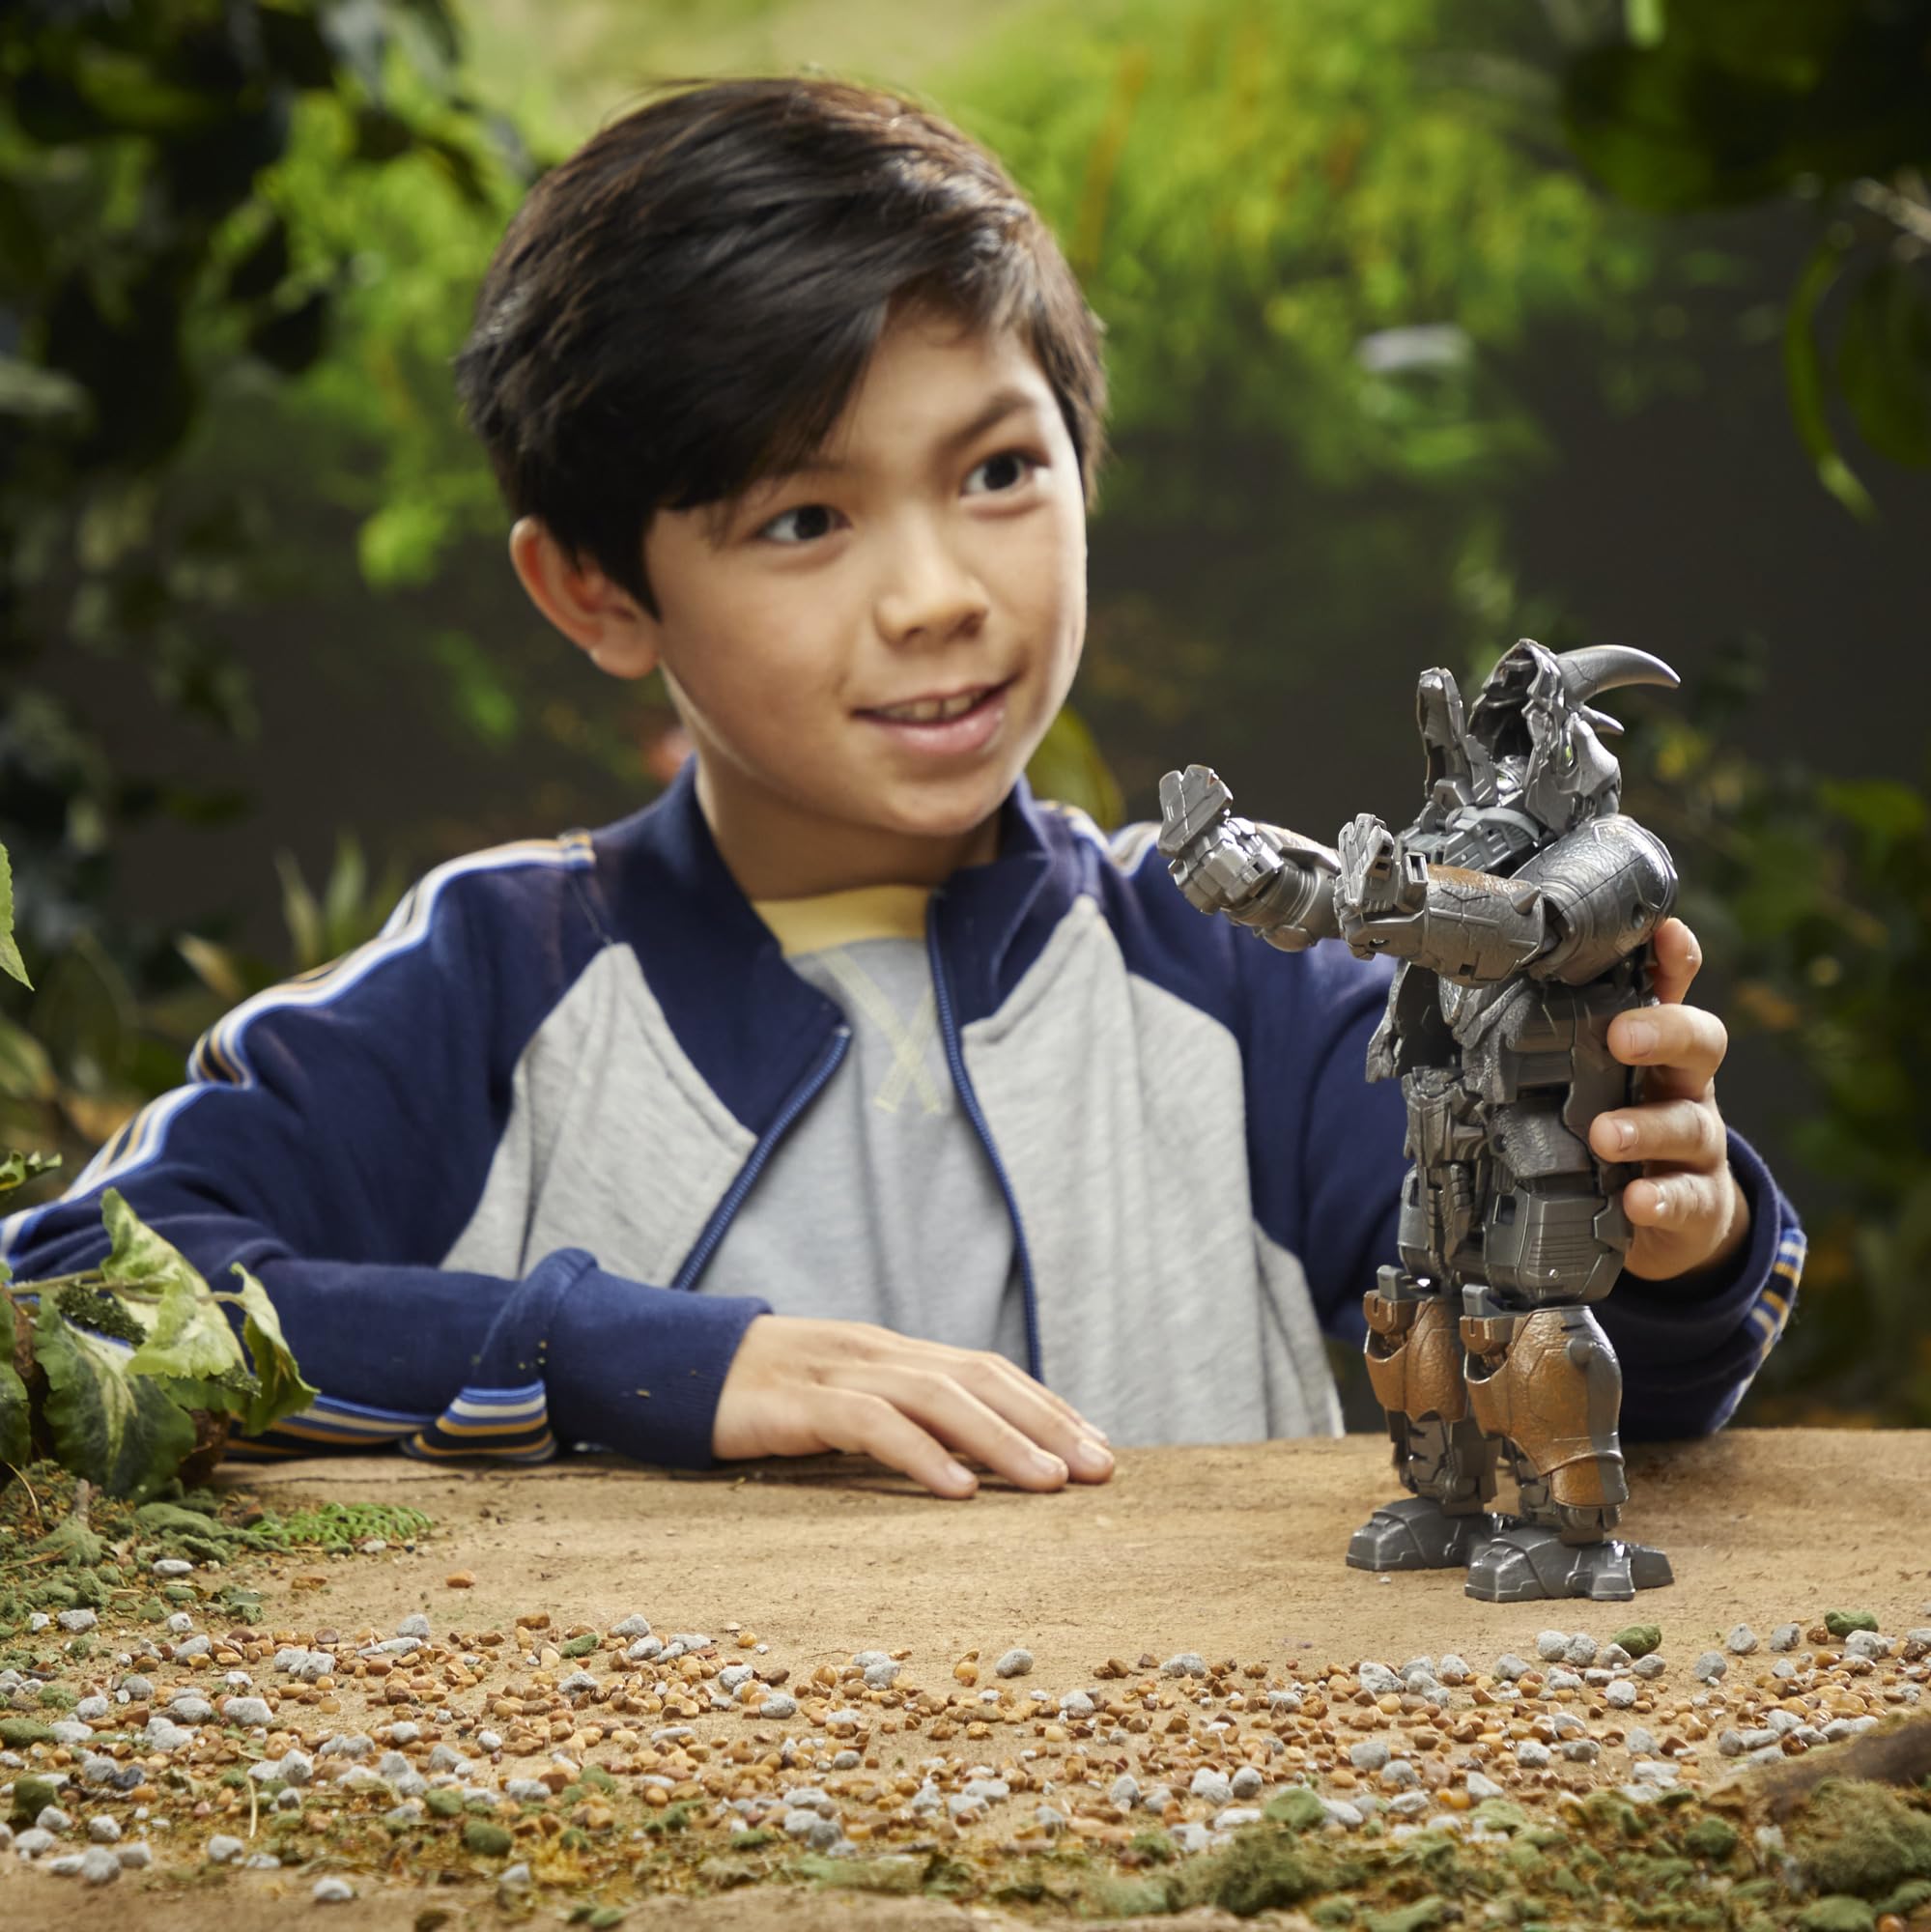 Transformers Toys Rise of The Beasts Movie, Smash Changer Rhinox Converting Action Figure for Ages 6 and up, 9-inch